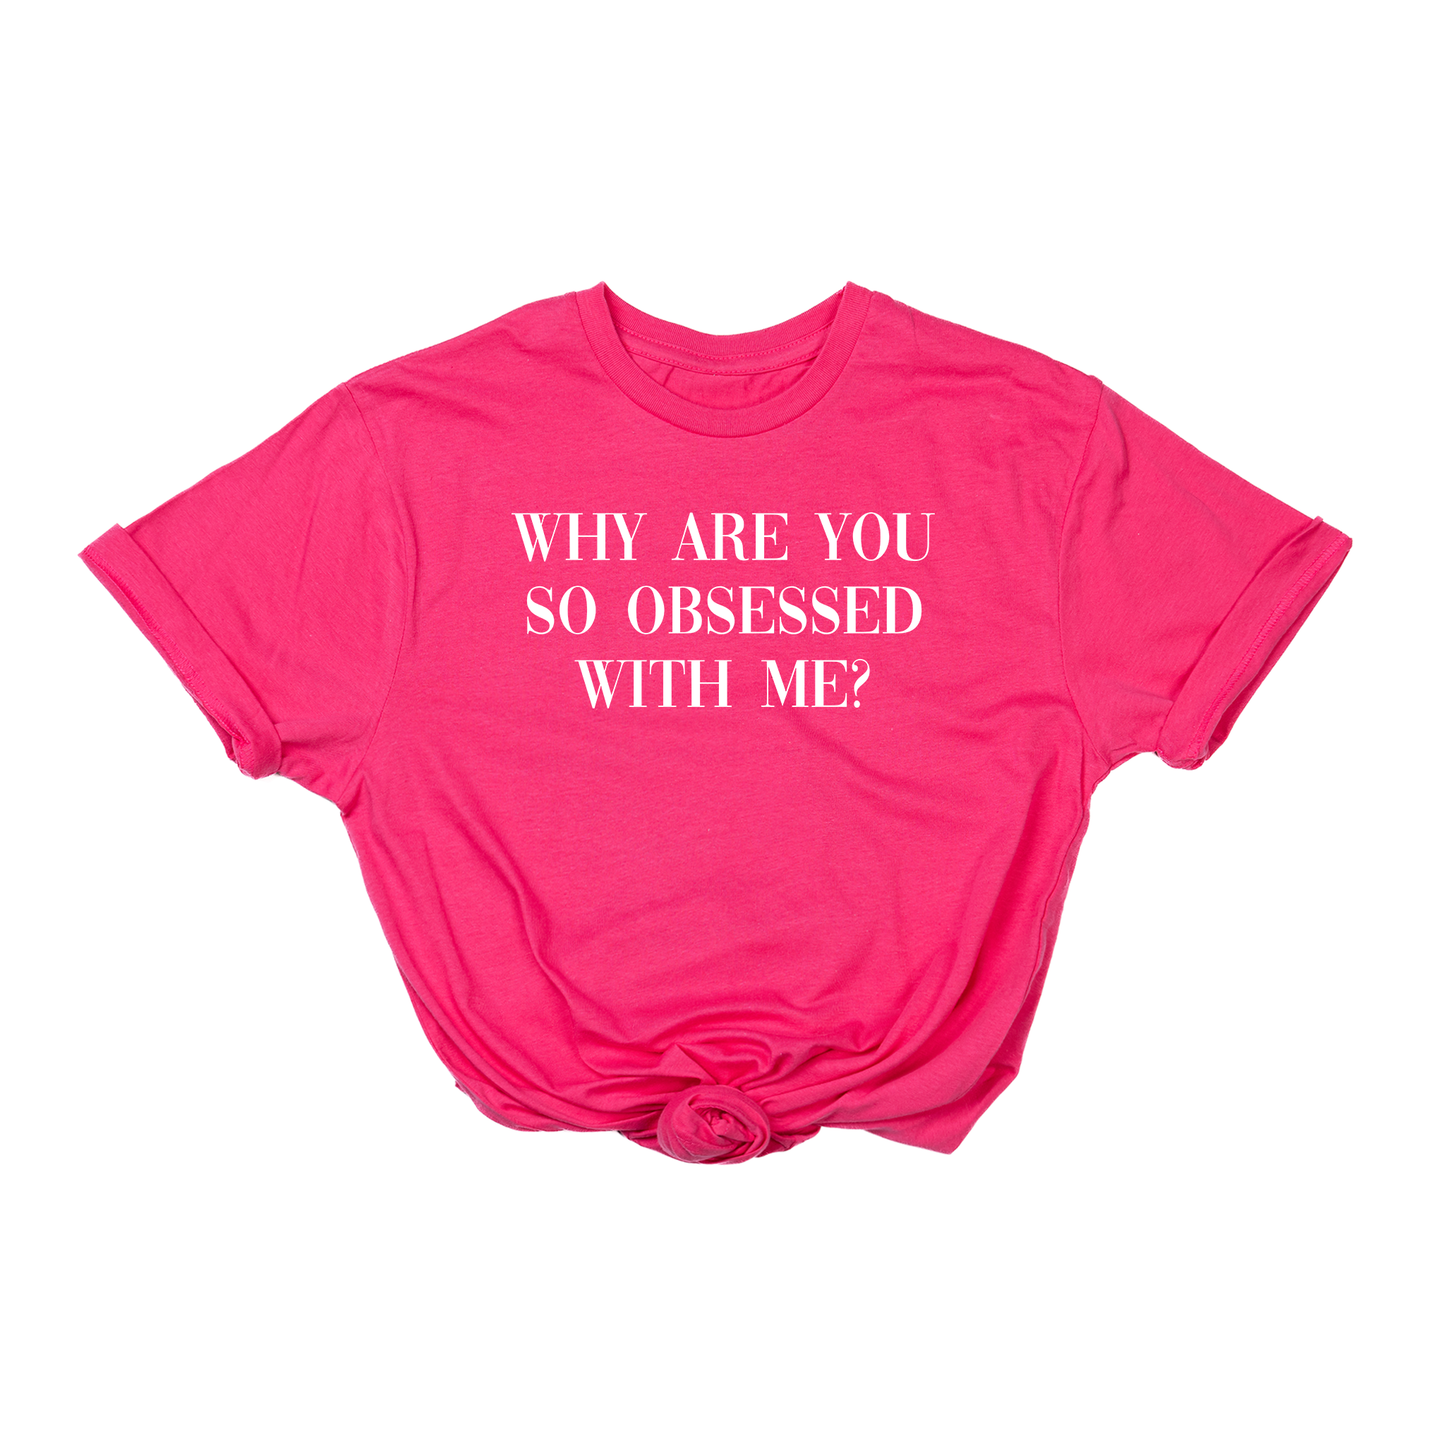 Why are you so obsessed with me (White) - Tee (Hot Pink)